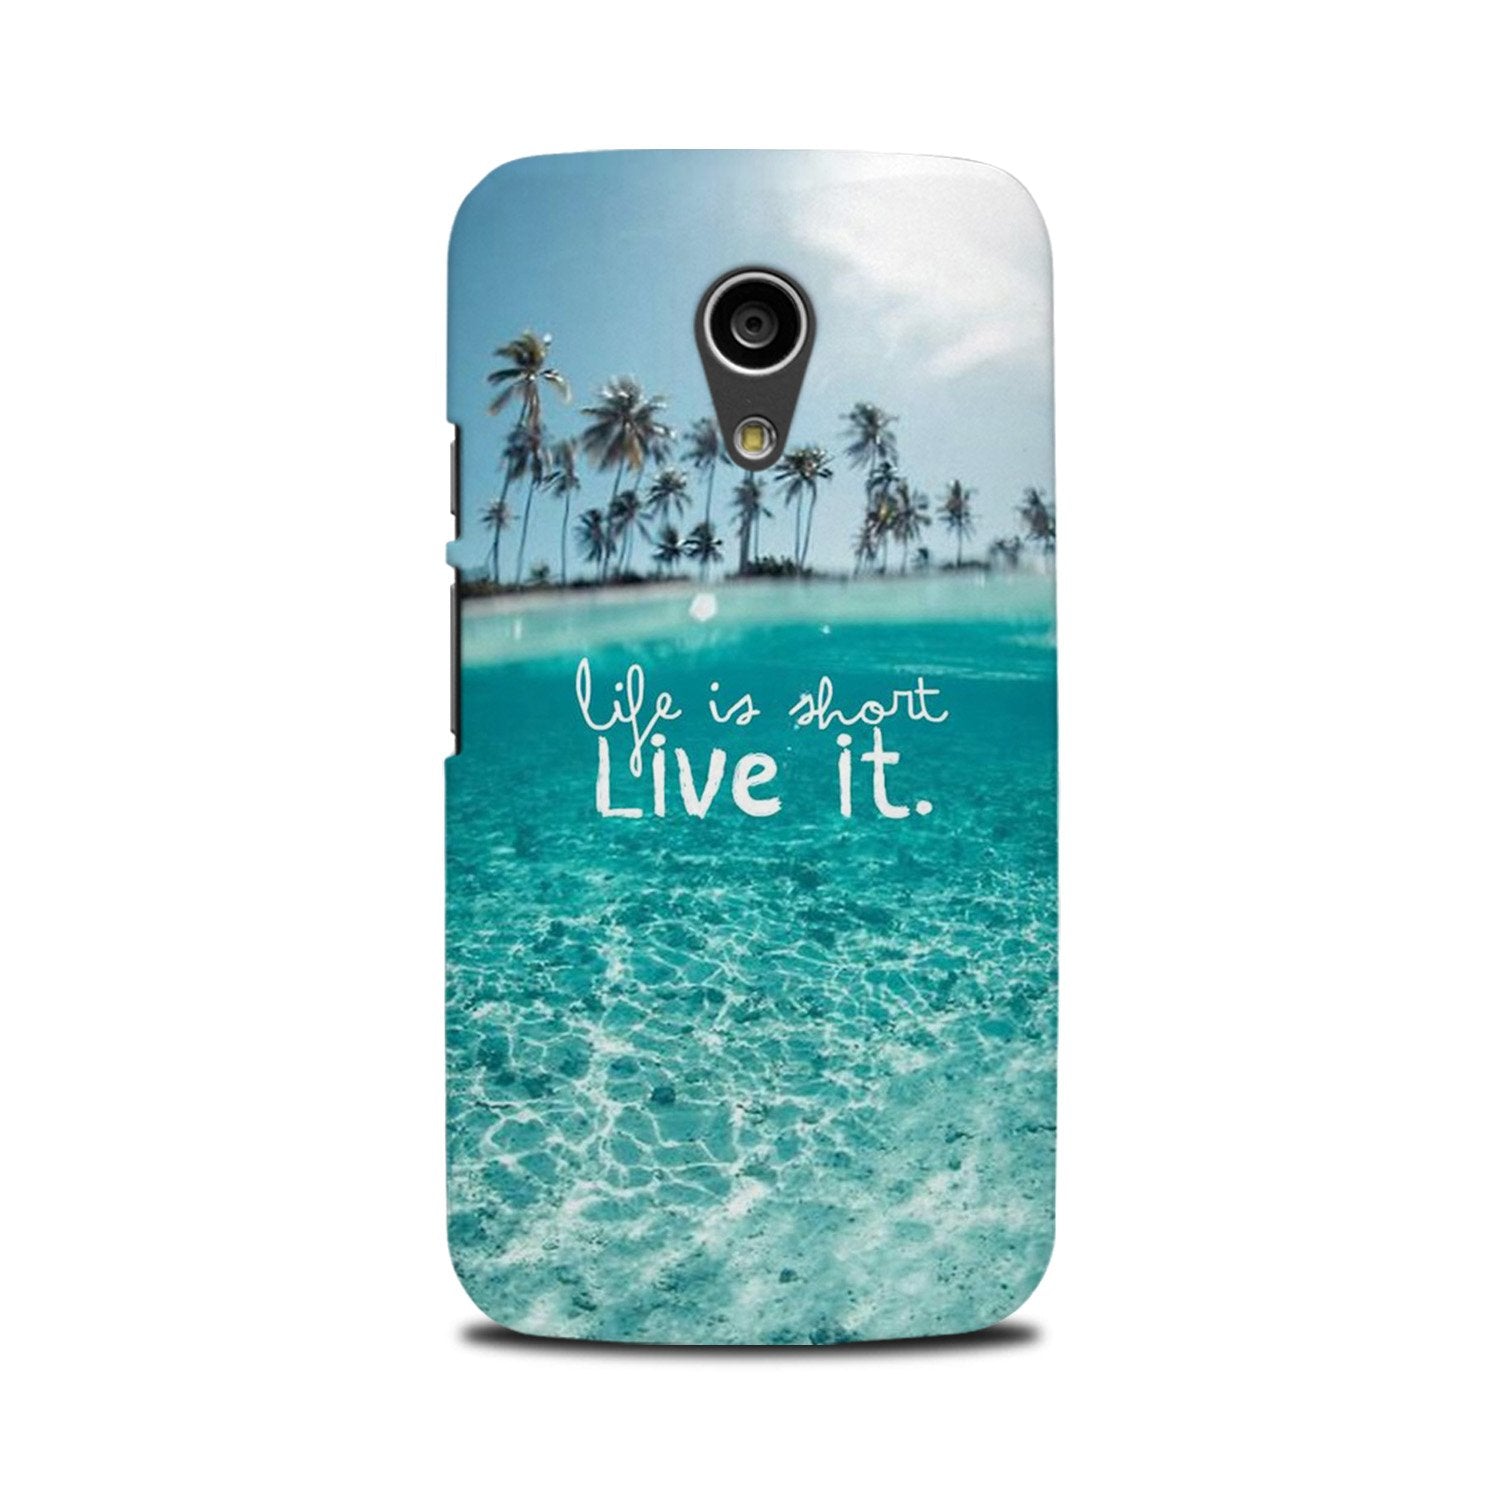 Life is short live it Case for Moto G2